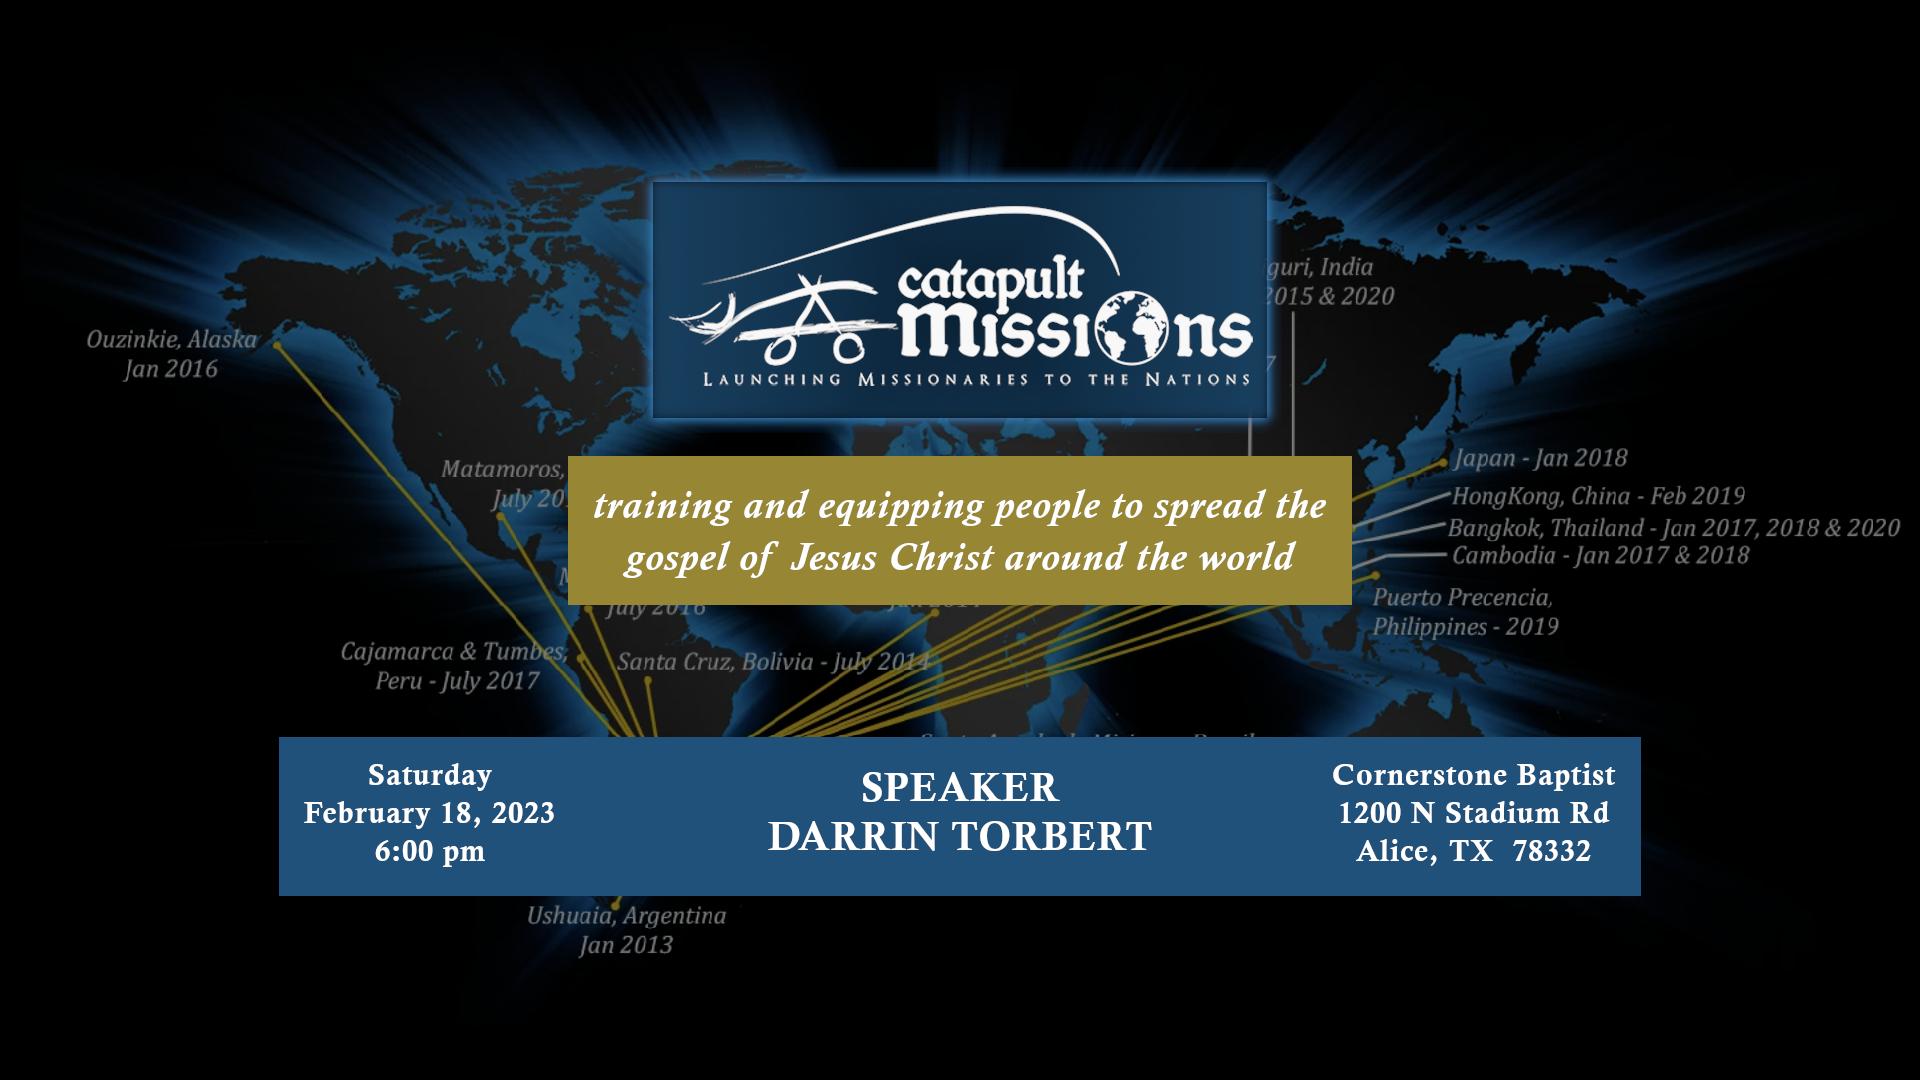 Catapult Missions, Darrin Torbert, information seminar about international missions